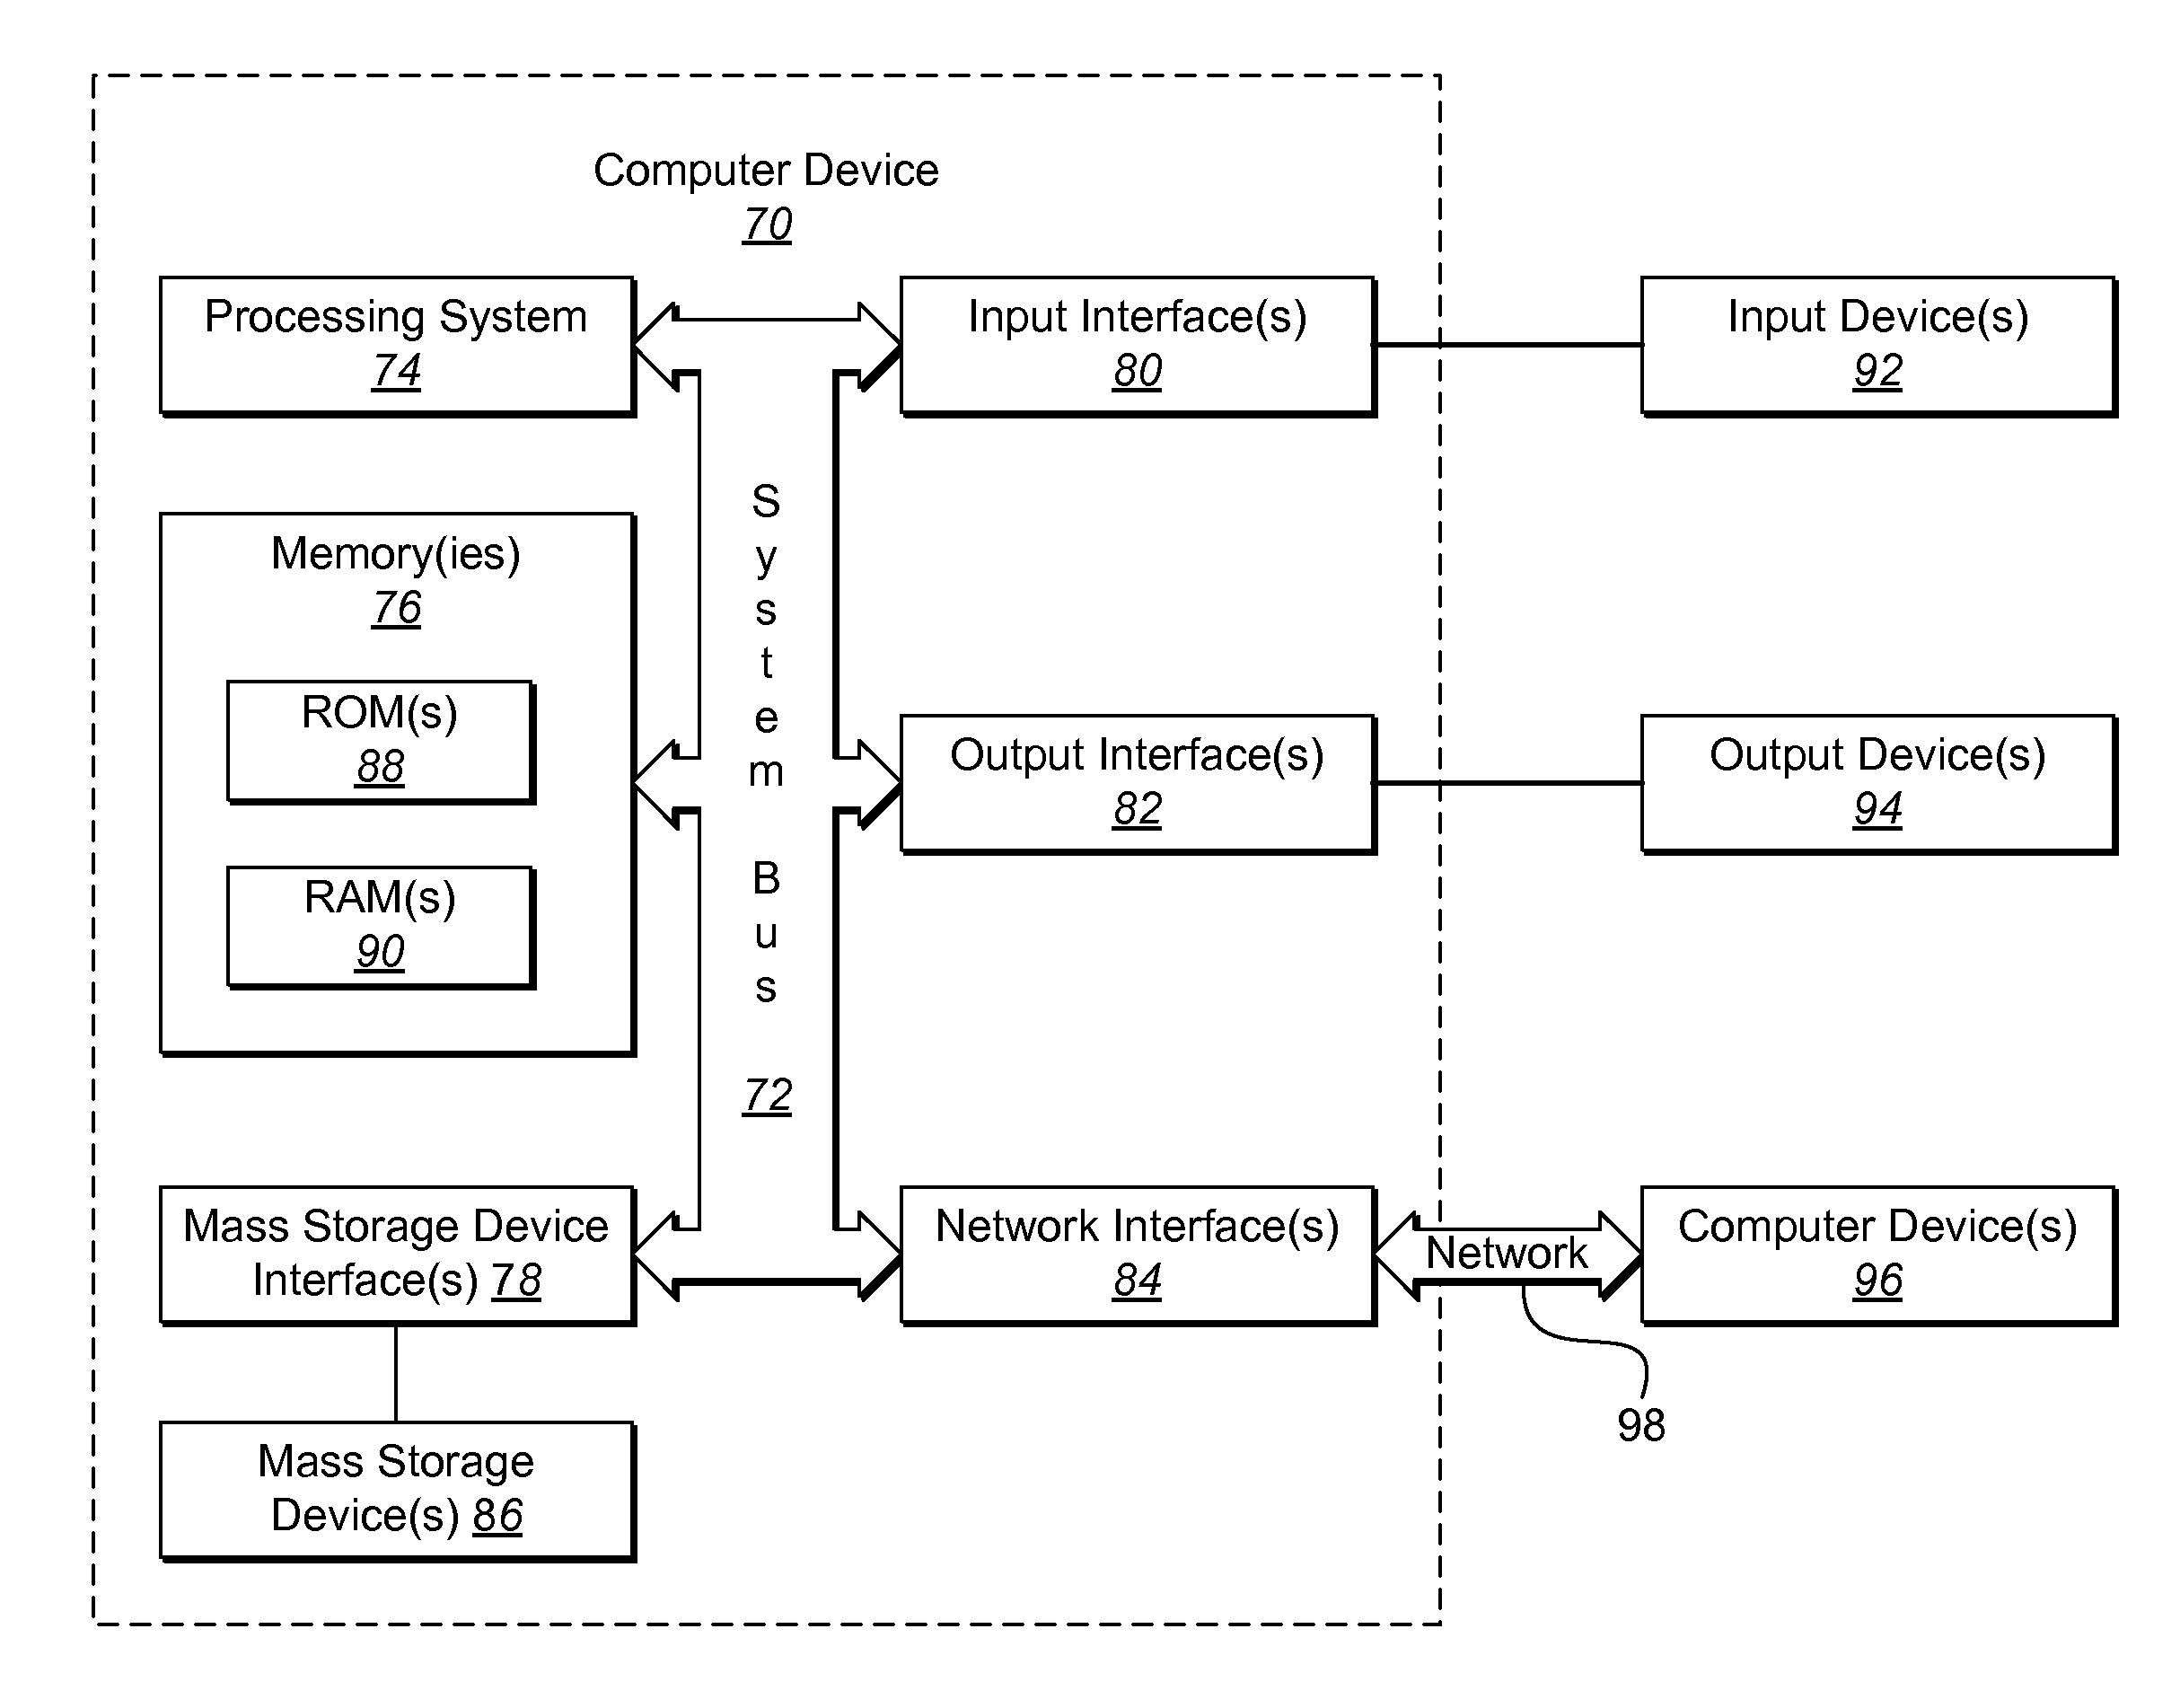 Systems and Methods for Intelligent and Flexible Management and Monitoring of Computer Systems